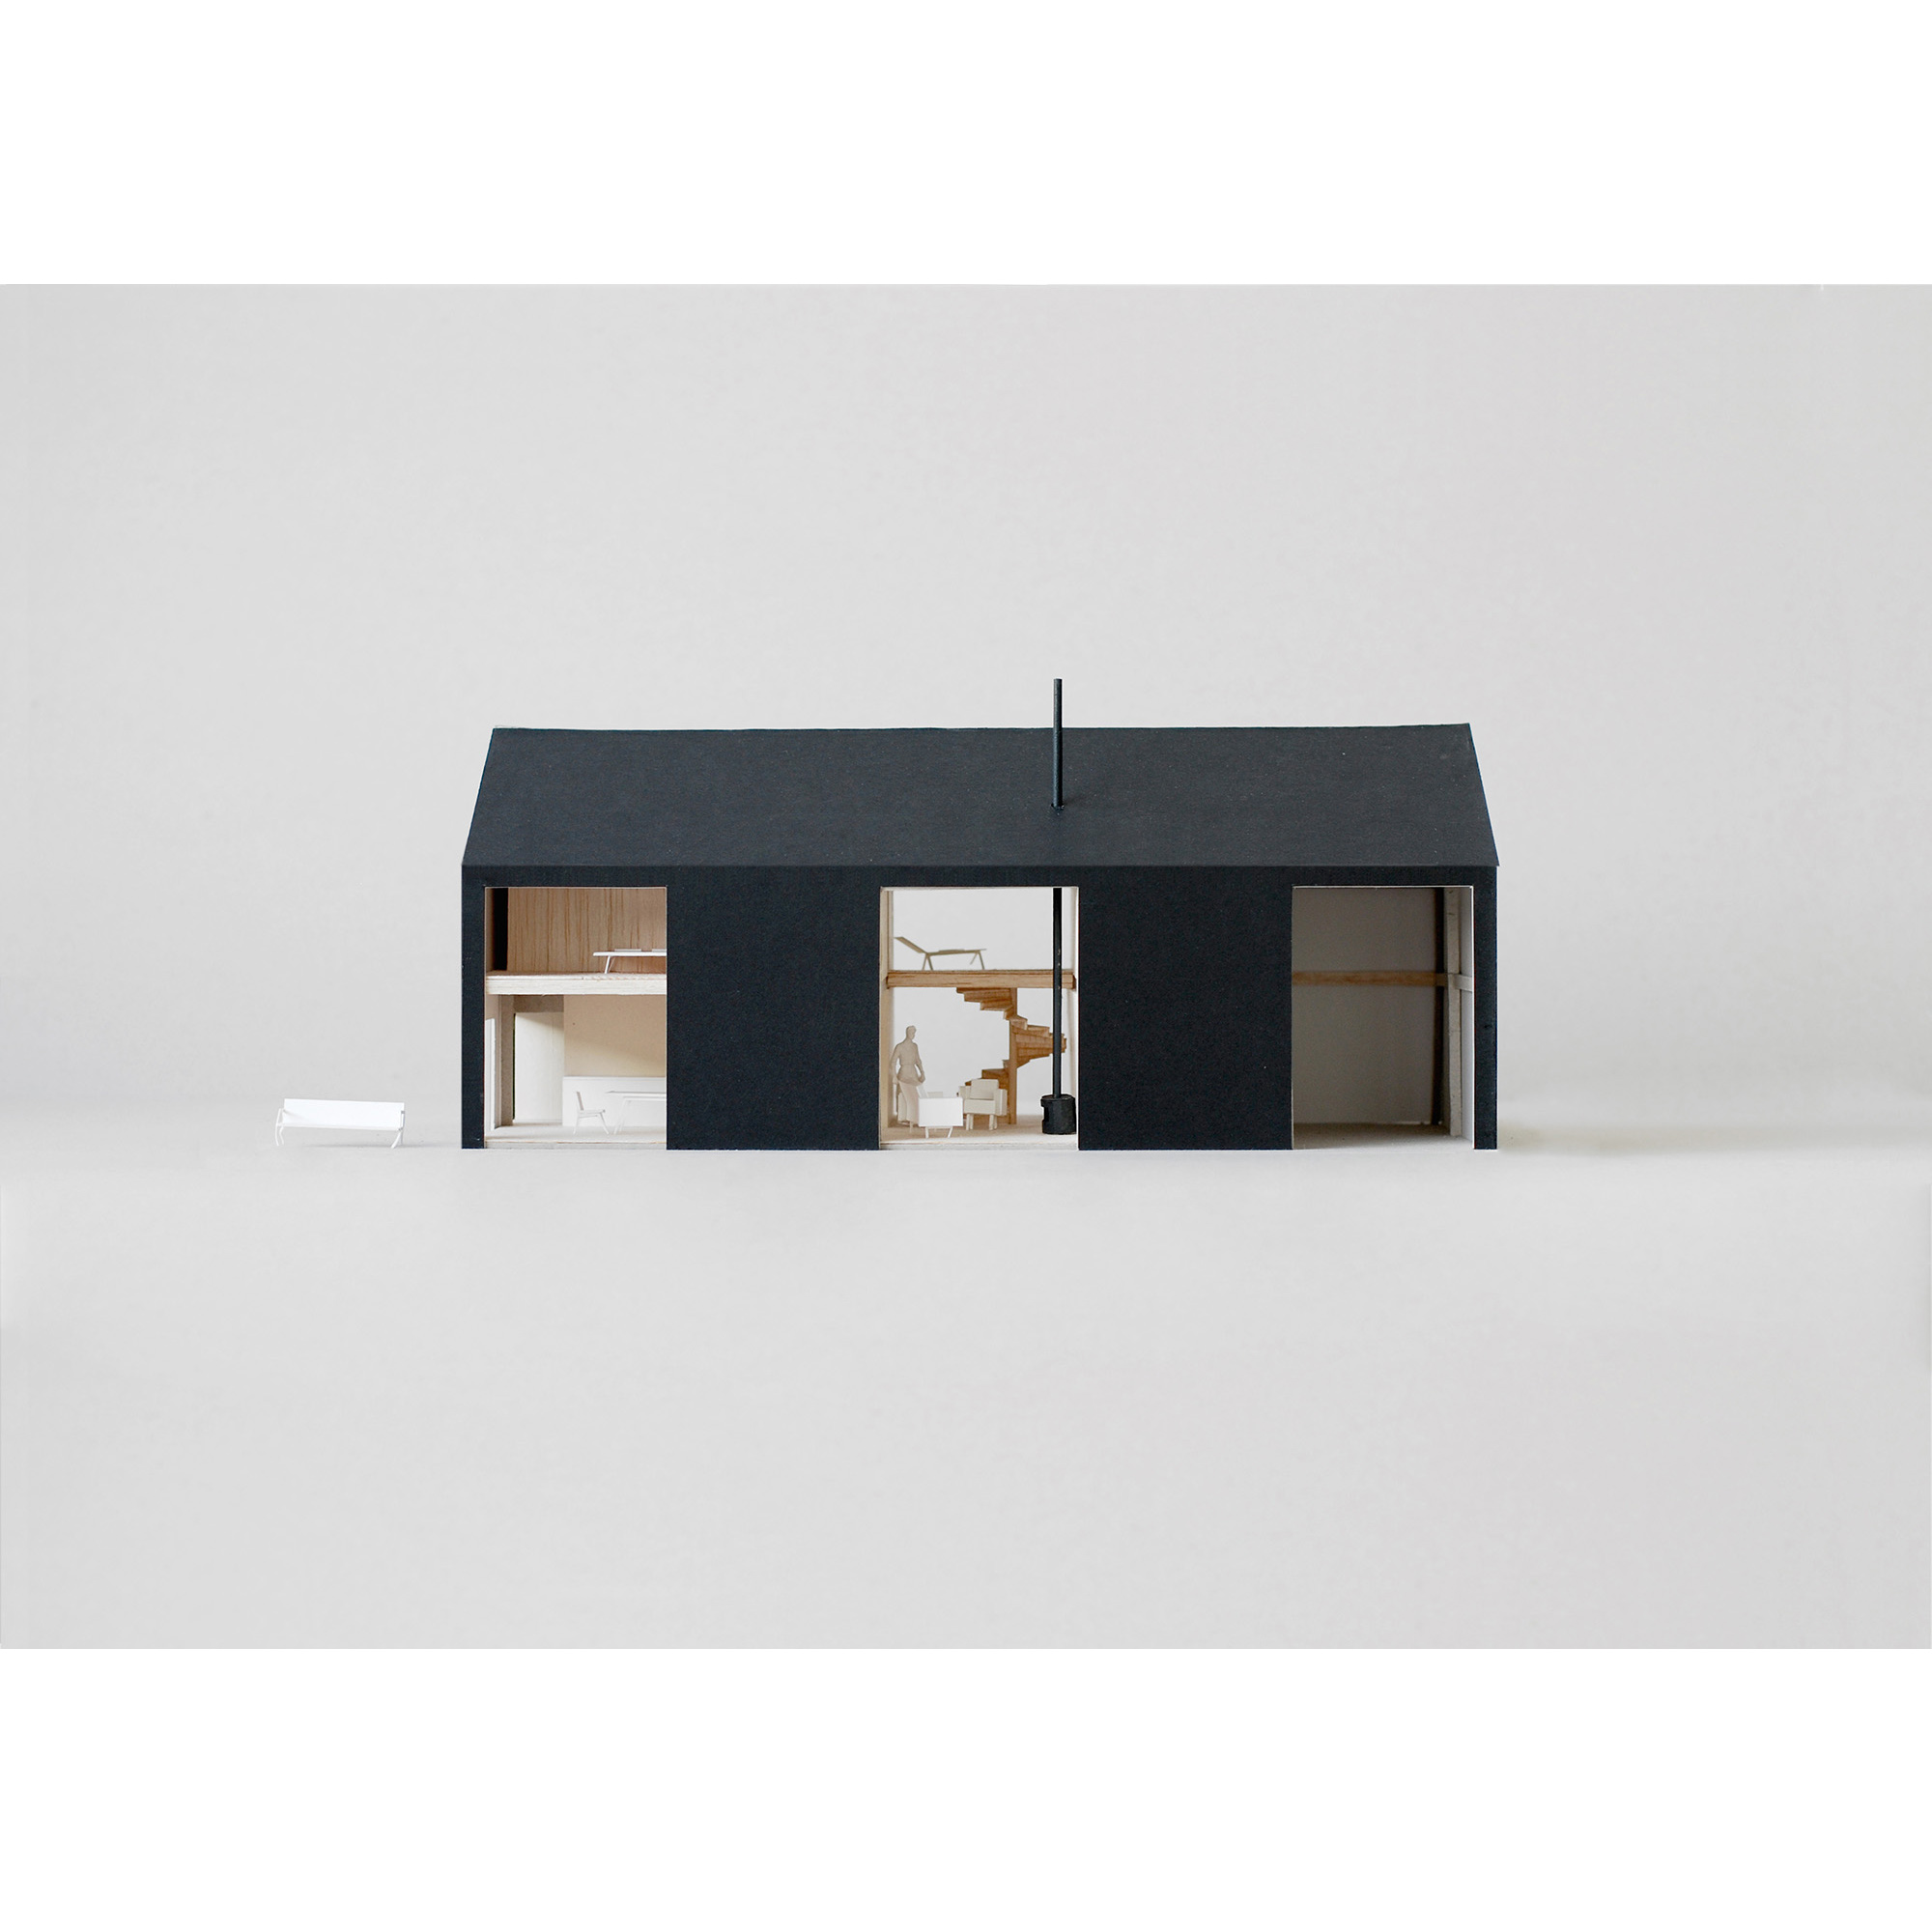 Erbar Mattes Architects barn-to-guest house conversion model front